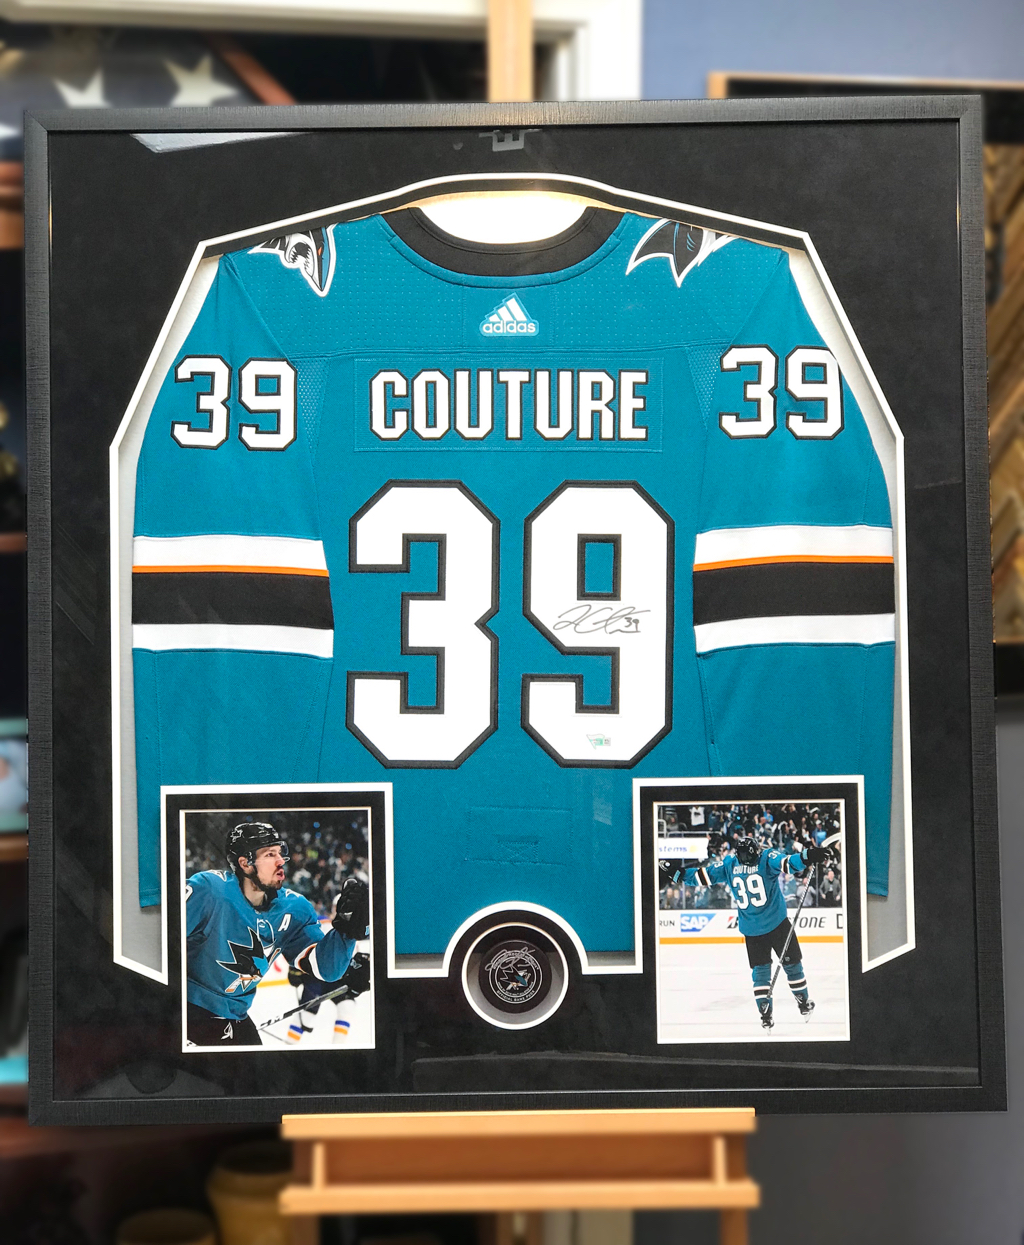 Jacquez Art and Jersey Framing - Wanted to share this beautiful